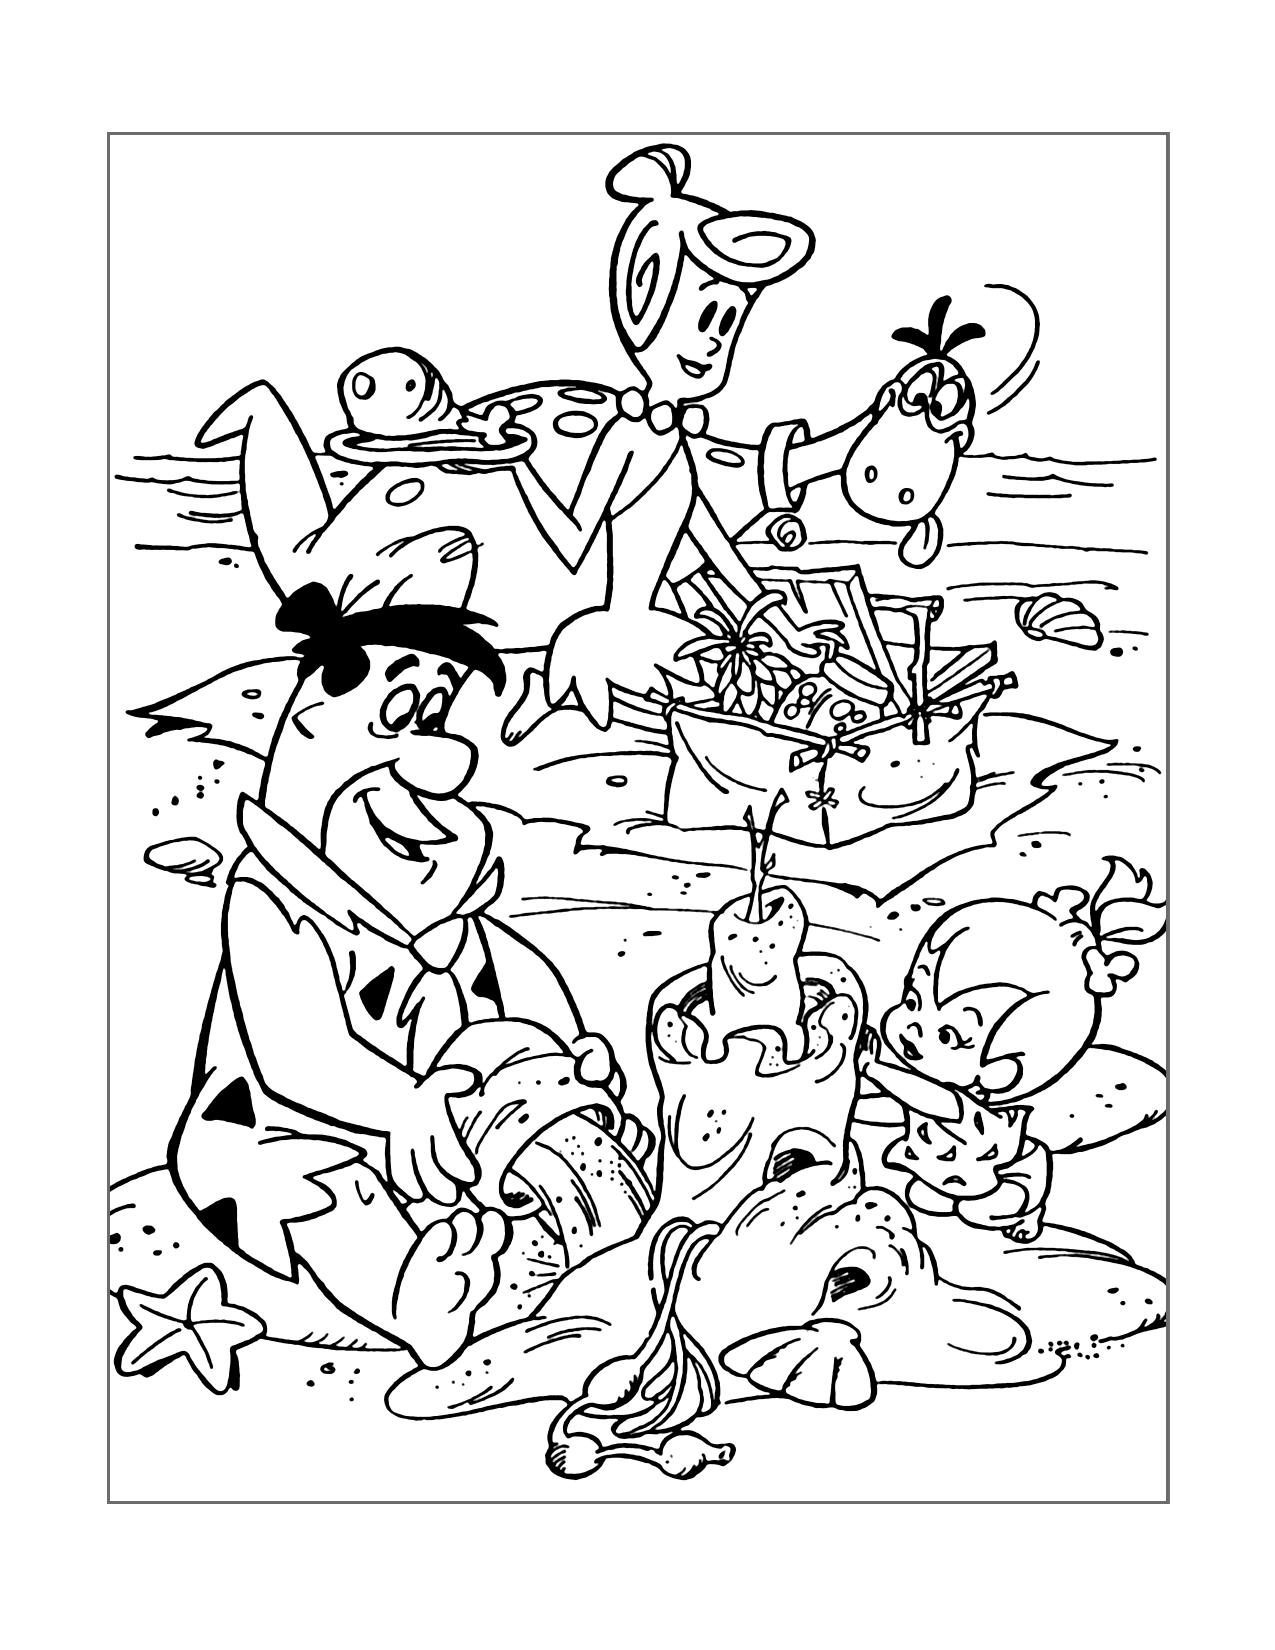 Flintstones At The Beach Coloring Page